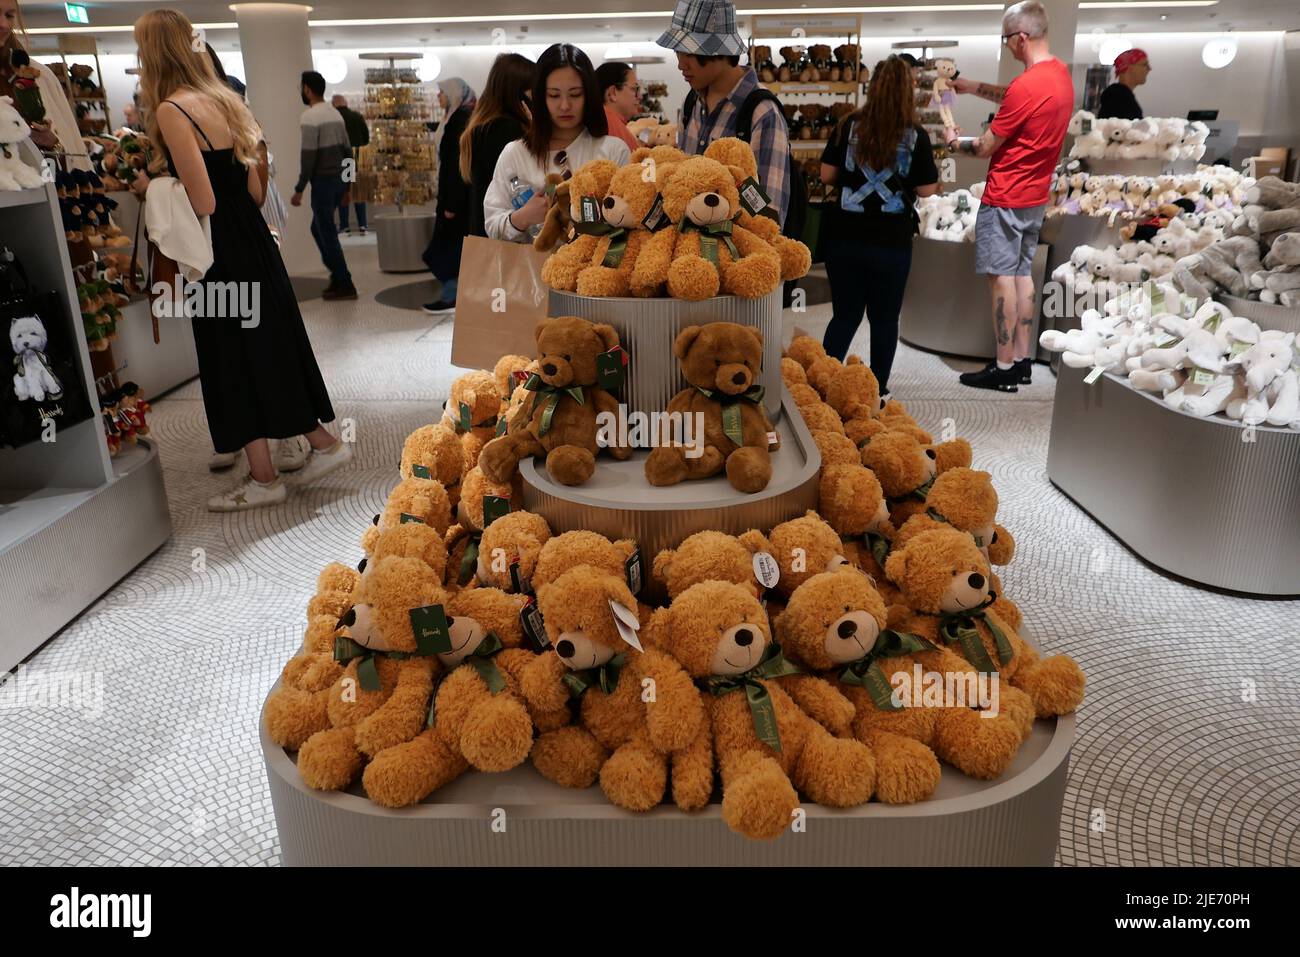 Harrods luxury store booming with customers again since Covid- 19 restrictions ended Louis XIII alcoholic beverages selling for thousands of pounds for those with deep pockets it's left to mature for 100 years and has a very distinctive taste like no other , and Harrods bears & soft toys are flying off the shelves now even the Harrods Christmas-2022 Bears are available and been bought now in June 6 months before Christmas .  the cuddly companion makes a wonderful souvenir from the world famous department store and Harrods bears and soft toys have become somewhat of an institution . Stock Photo